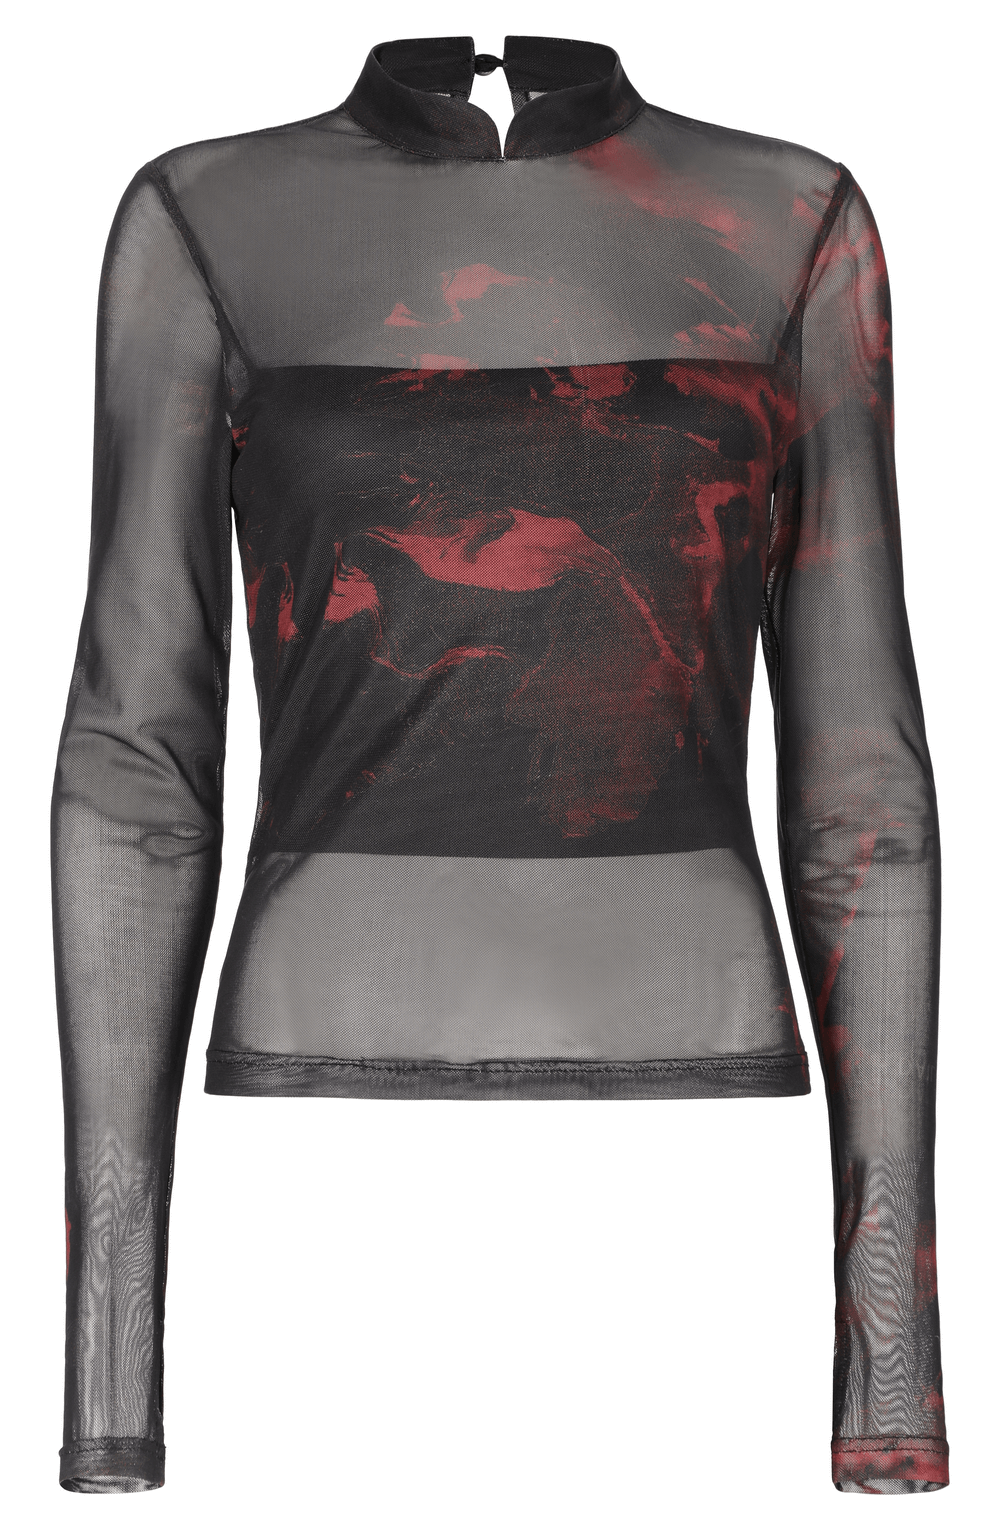 Stylish Women's Mesh Top with Stand Сollar and Red Print